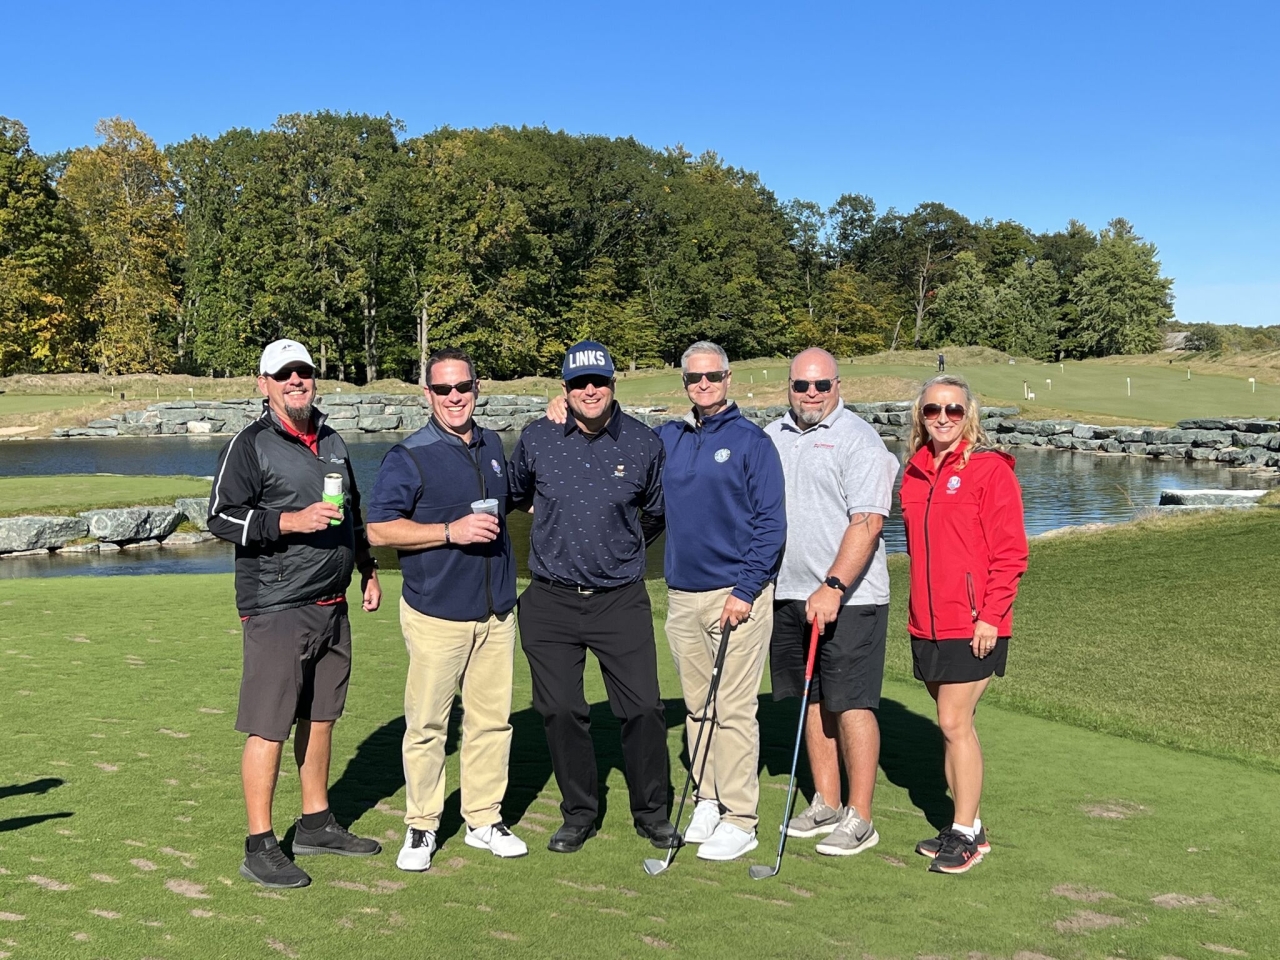 Group of golfers posing in front of pond